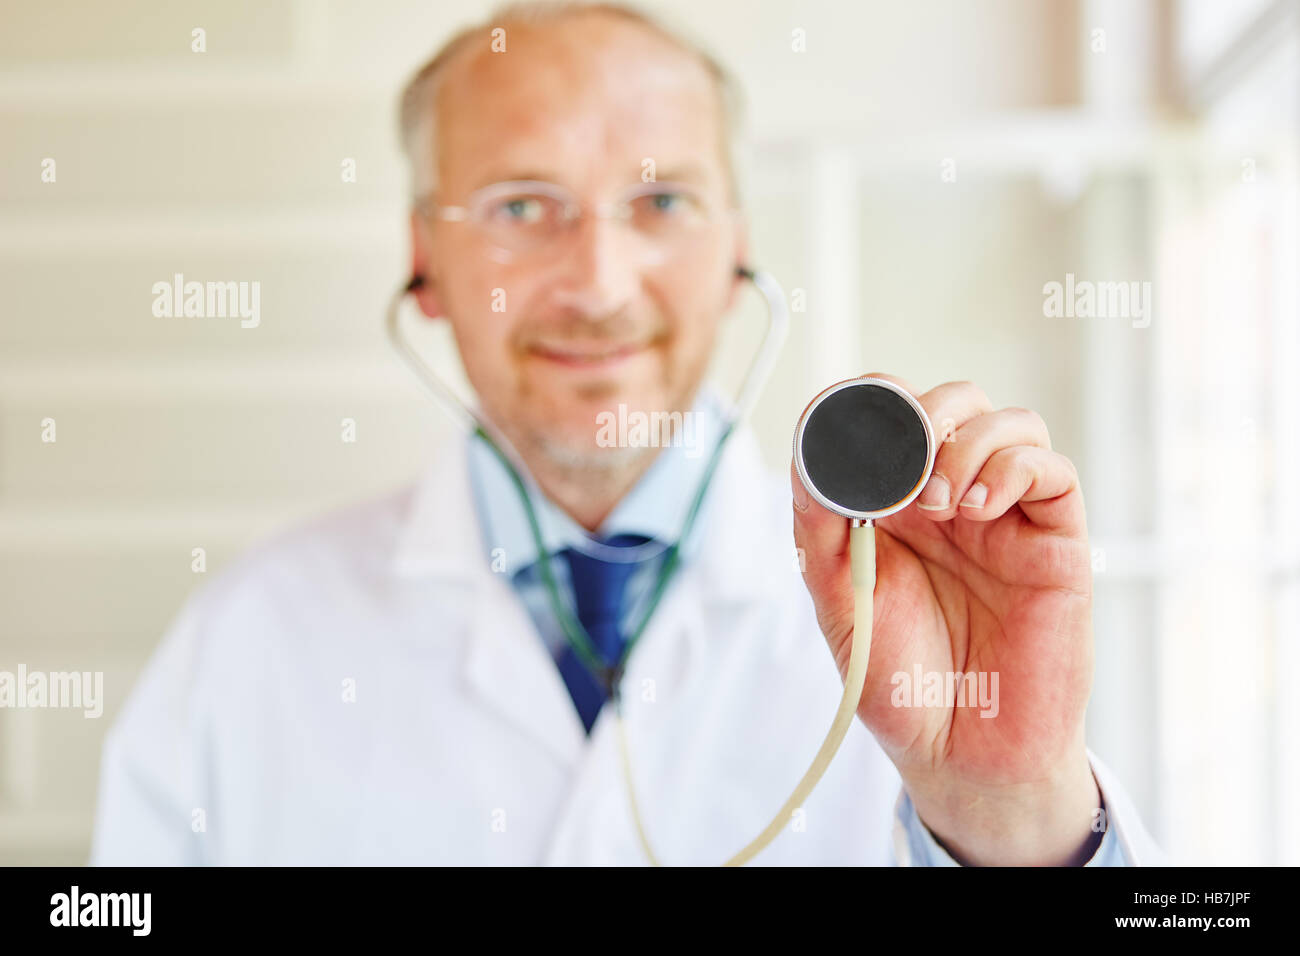 Stethoscope for diagnostics holded by doctor at hospital Stock Photo